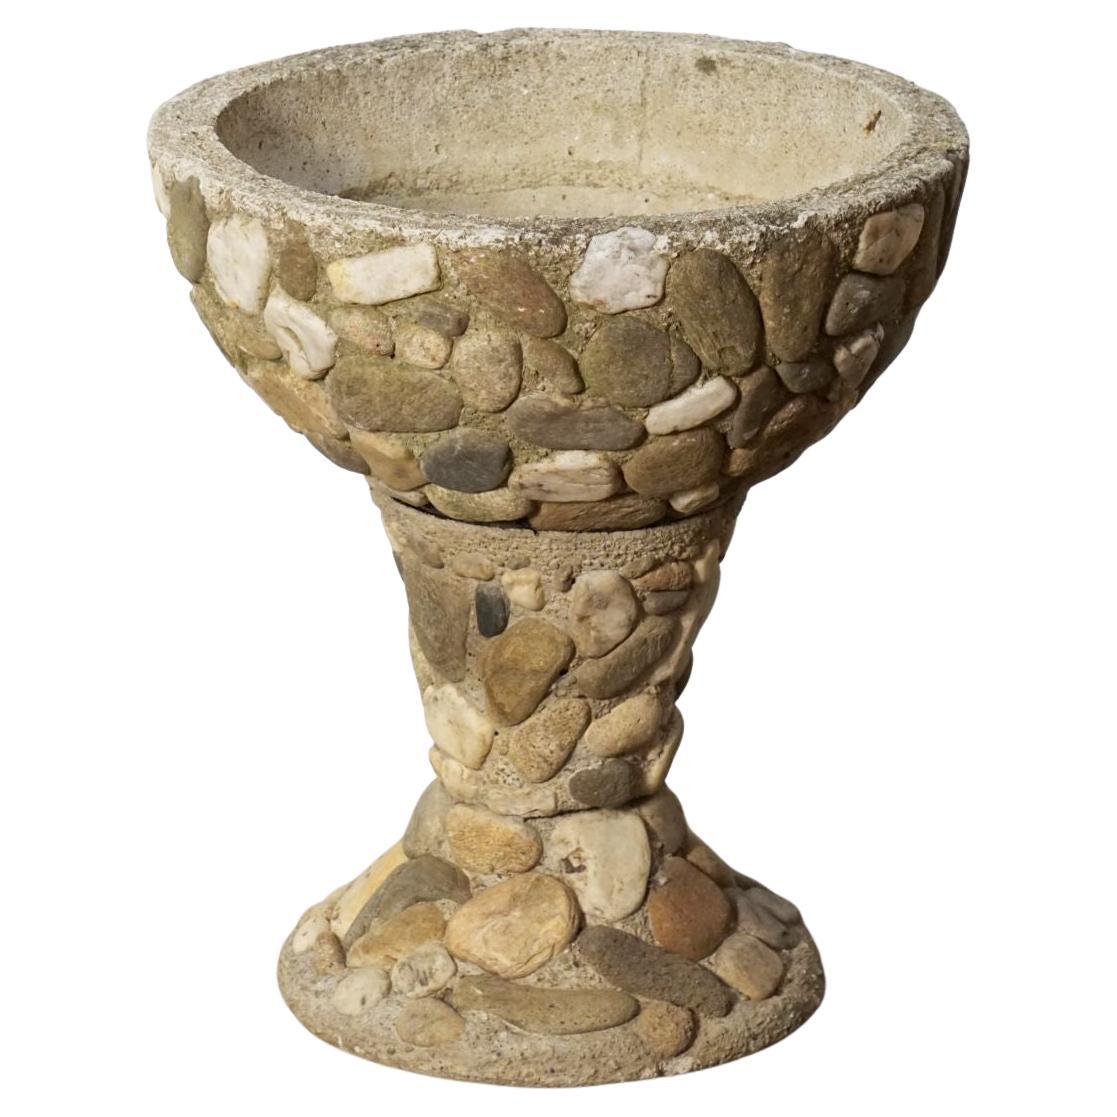 Raised Pebble-Pot Garden Planter or Urn with Embedded Stones from France For Sale